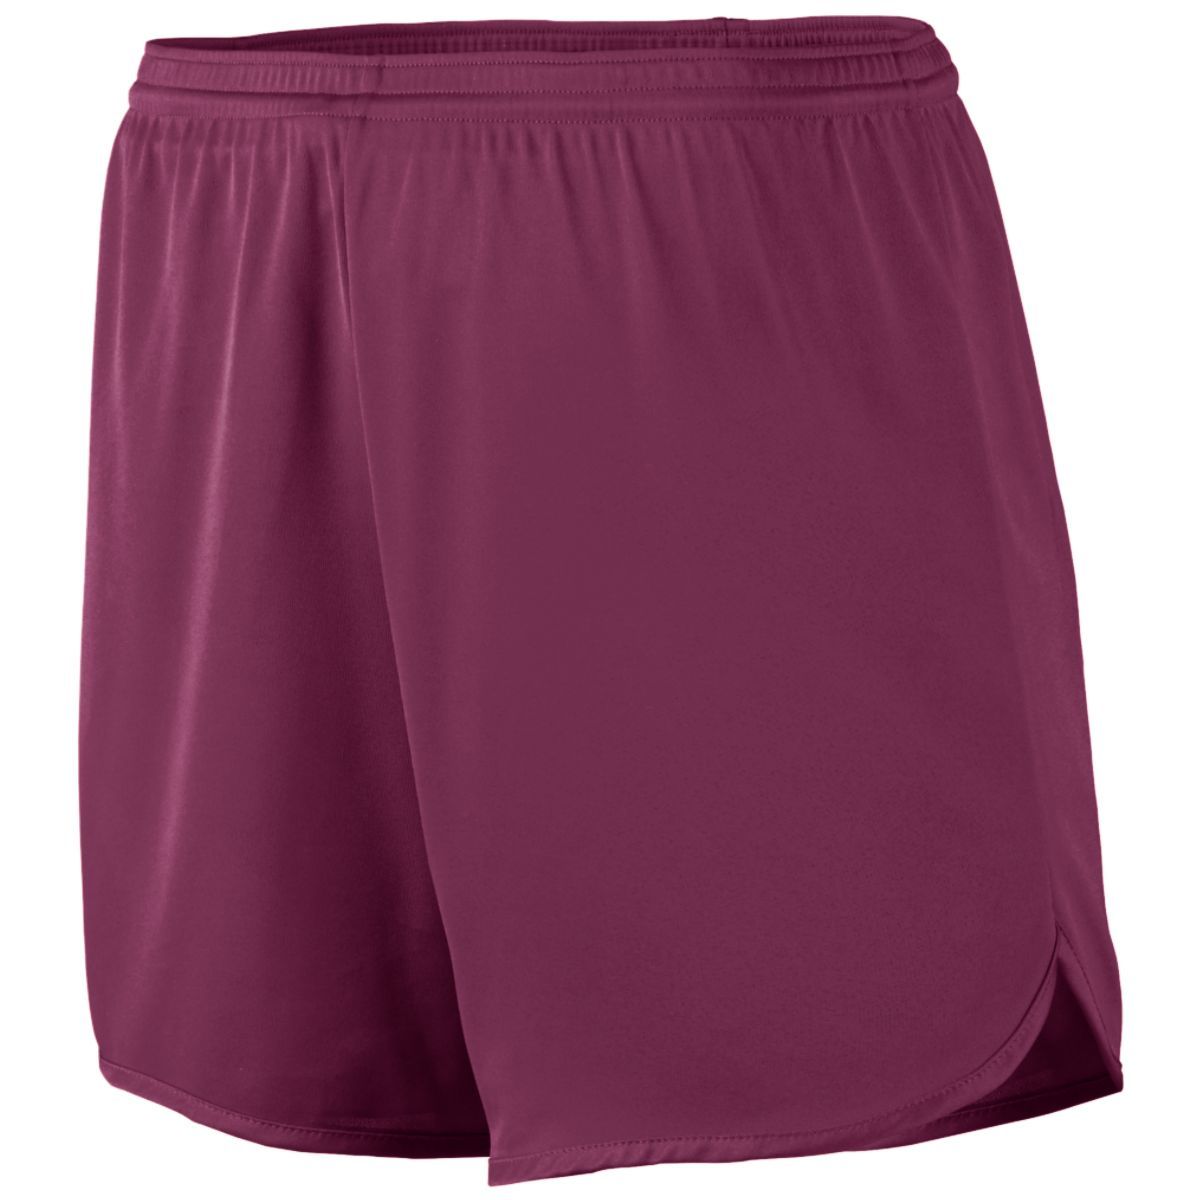 Augusta Sportswear Accelerate Shorts in Maroon  -Part of the Adult, Adult-Shorts, Augusta-Products, Track-Field product lines at KanaleyCreations.com